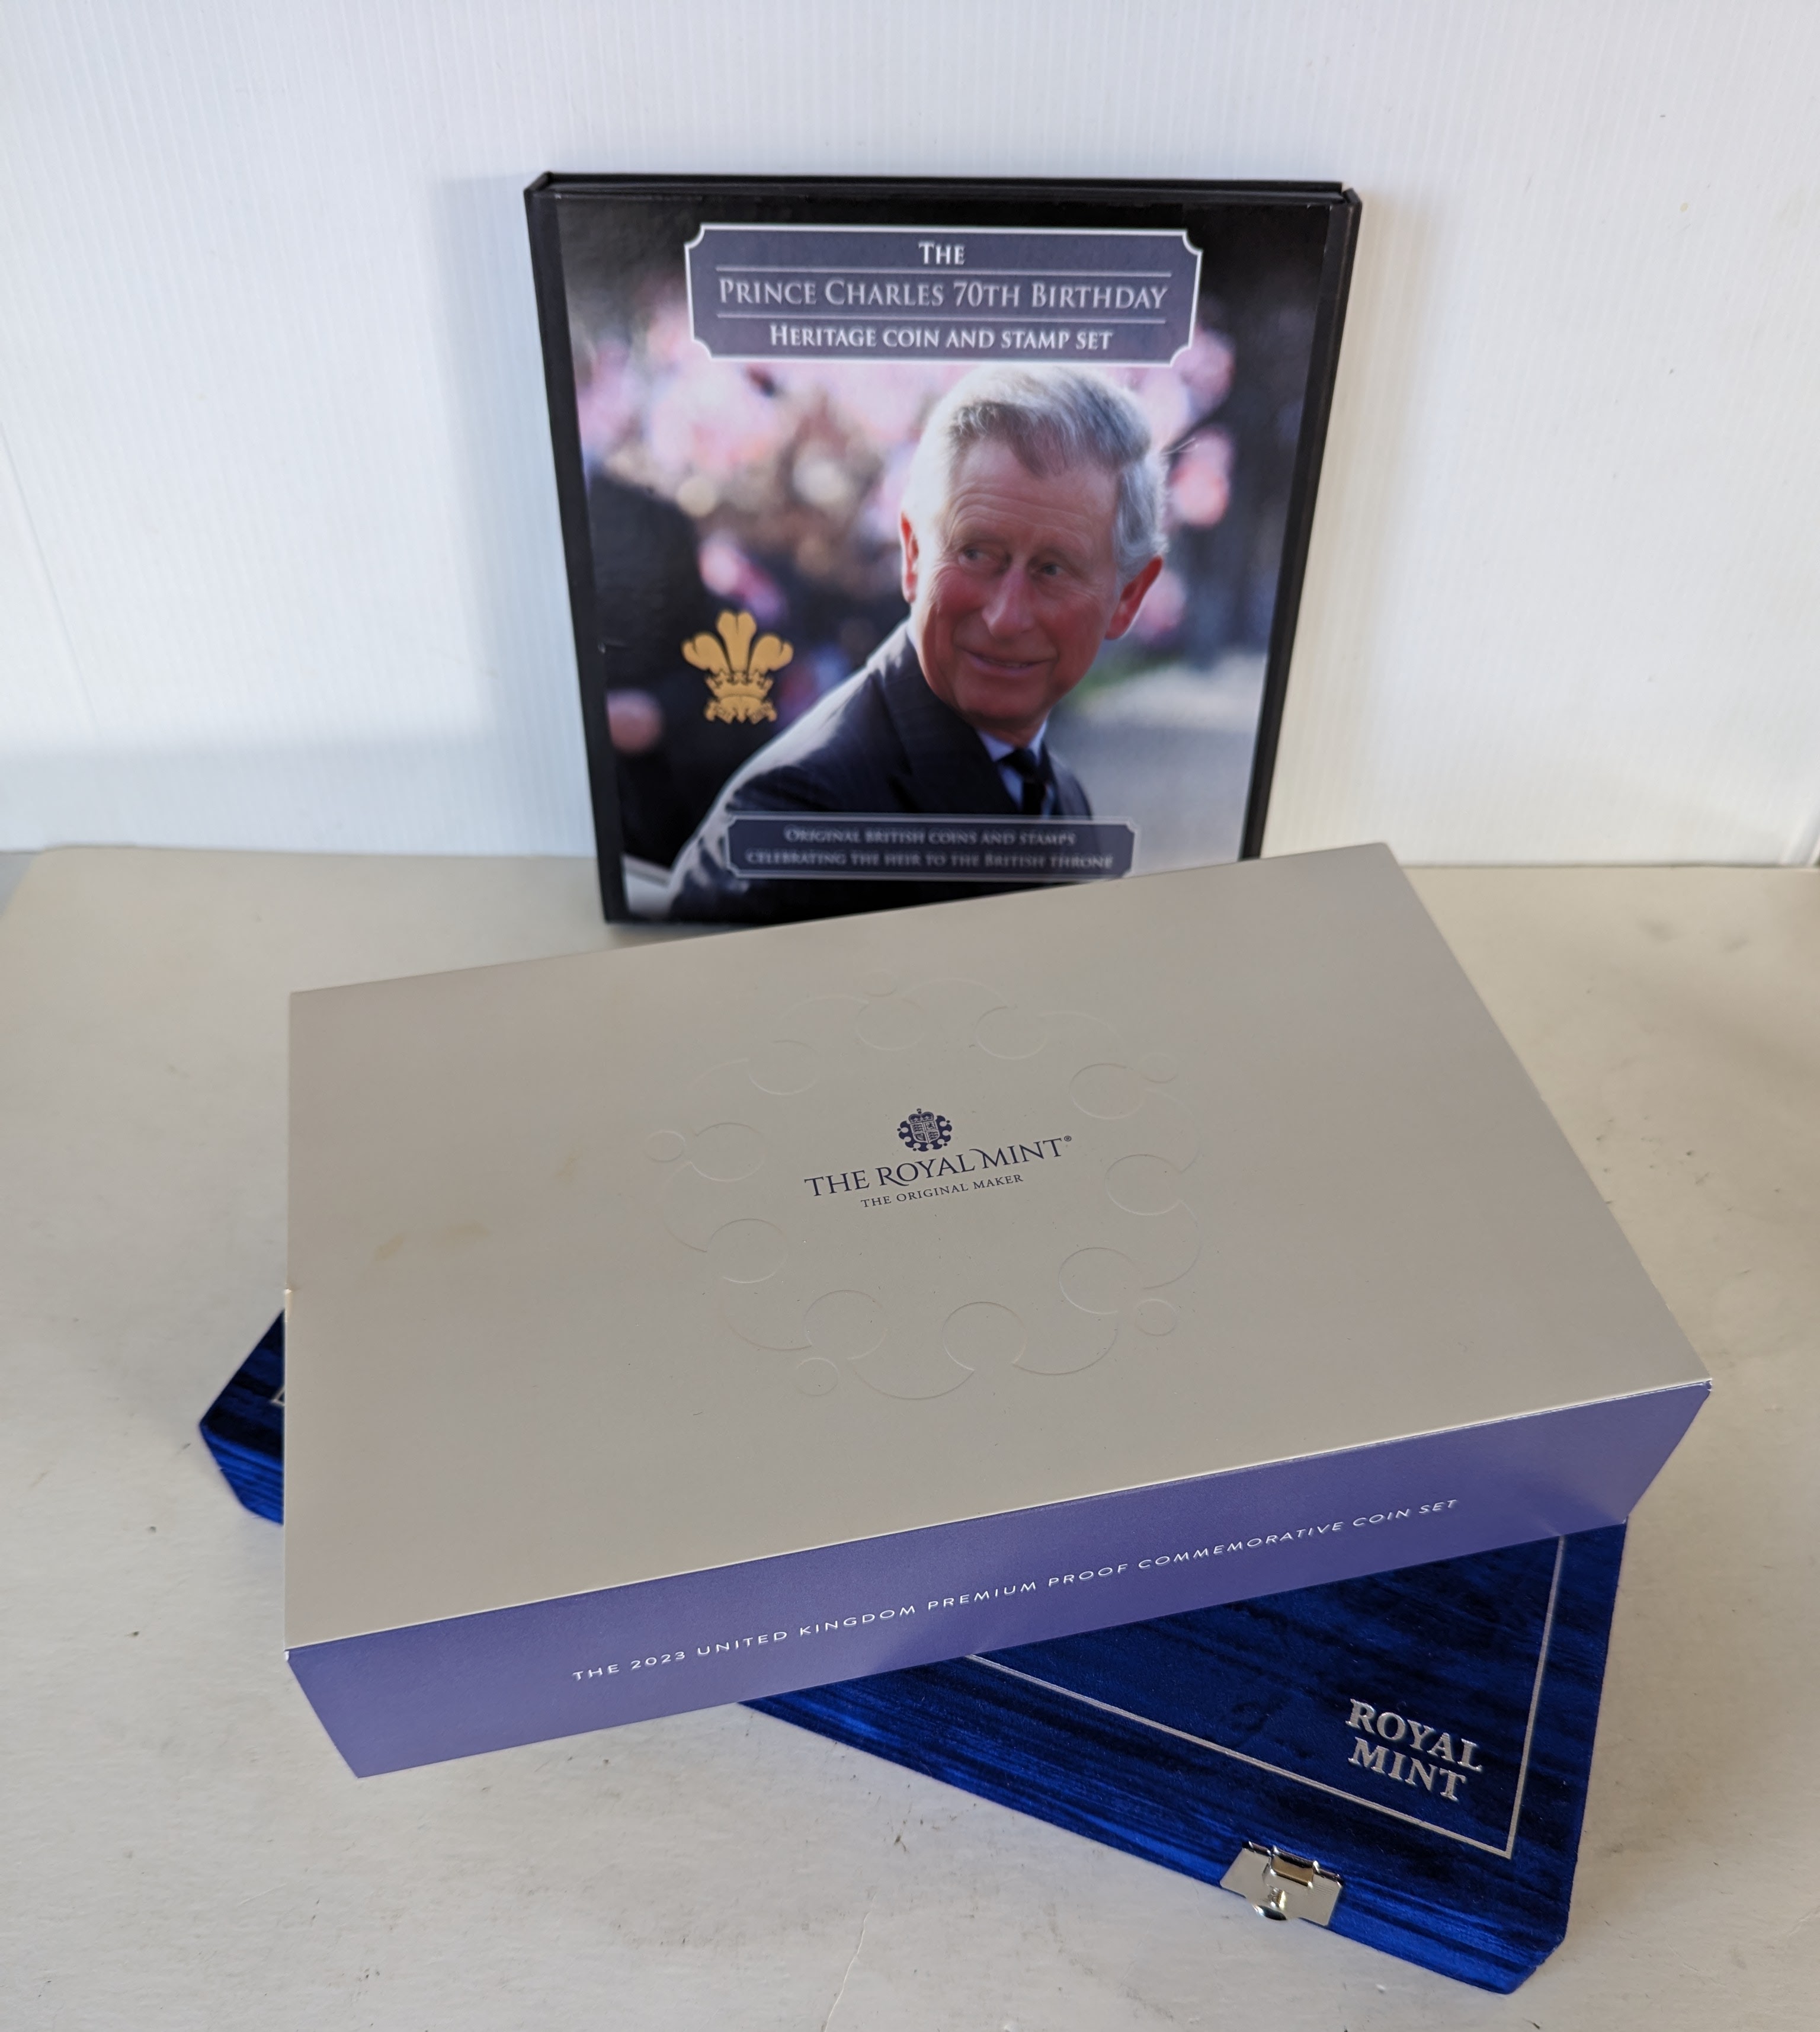 HRH Prince Charles 70th Birthday Heritage Coin and Stamp Set, limited edition no. 210/499